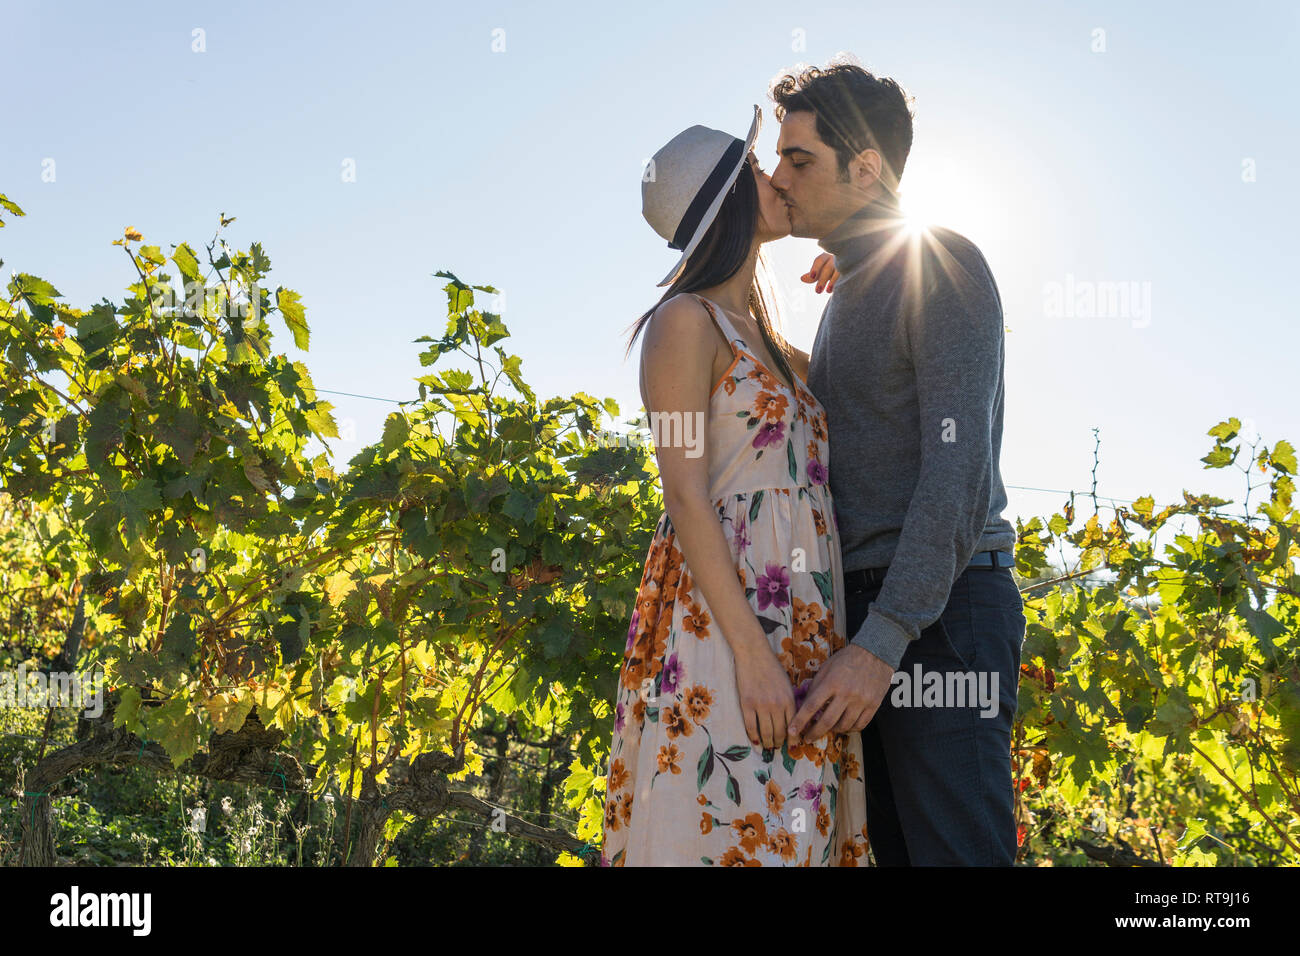 Italy, Tuscany, Siena, young couple kissing in a vineyard Stock Photo